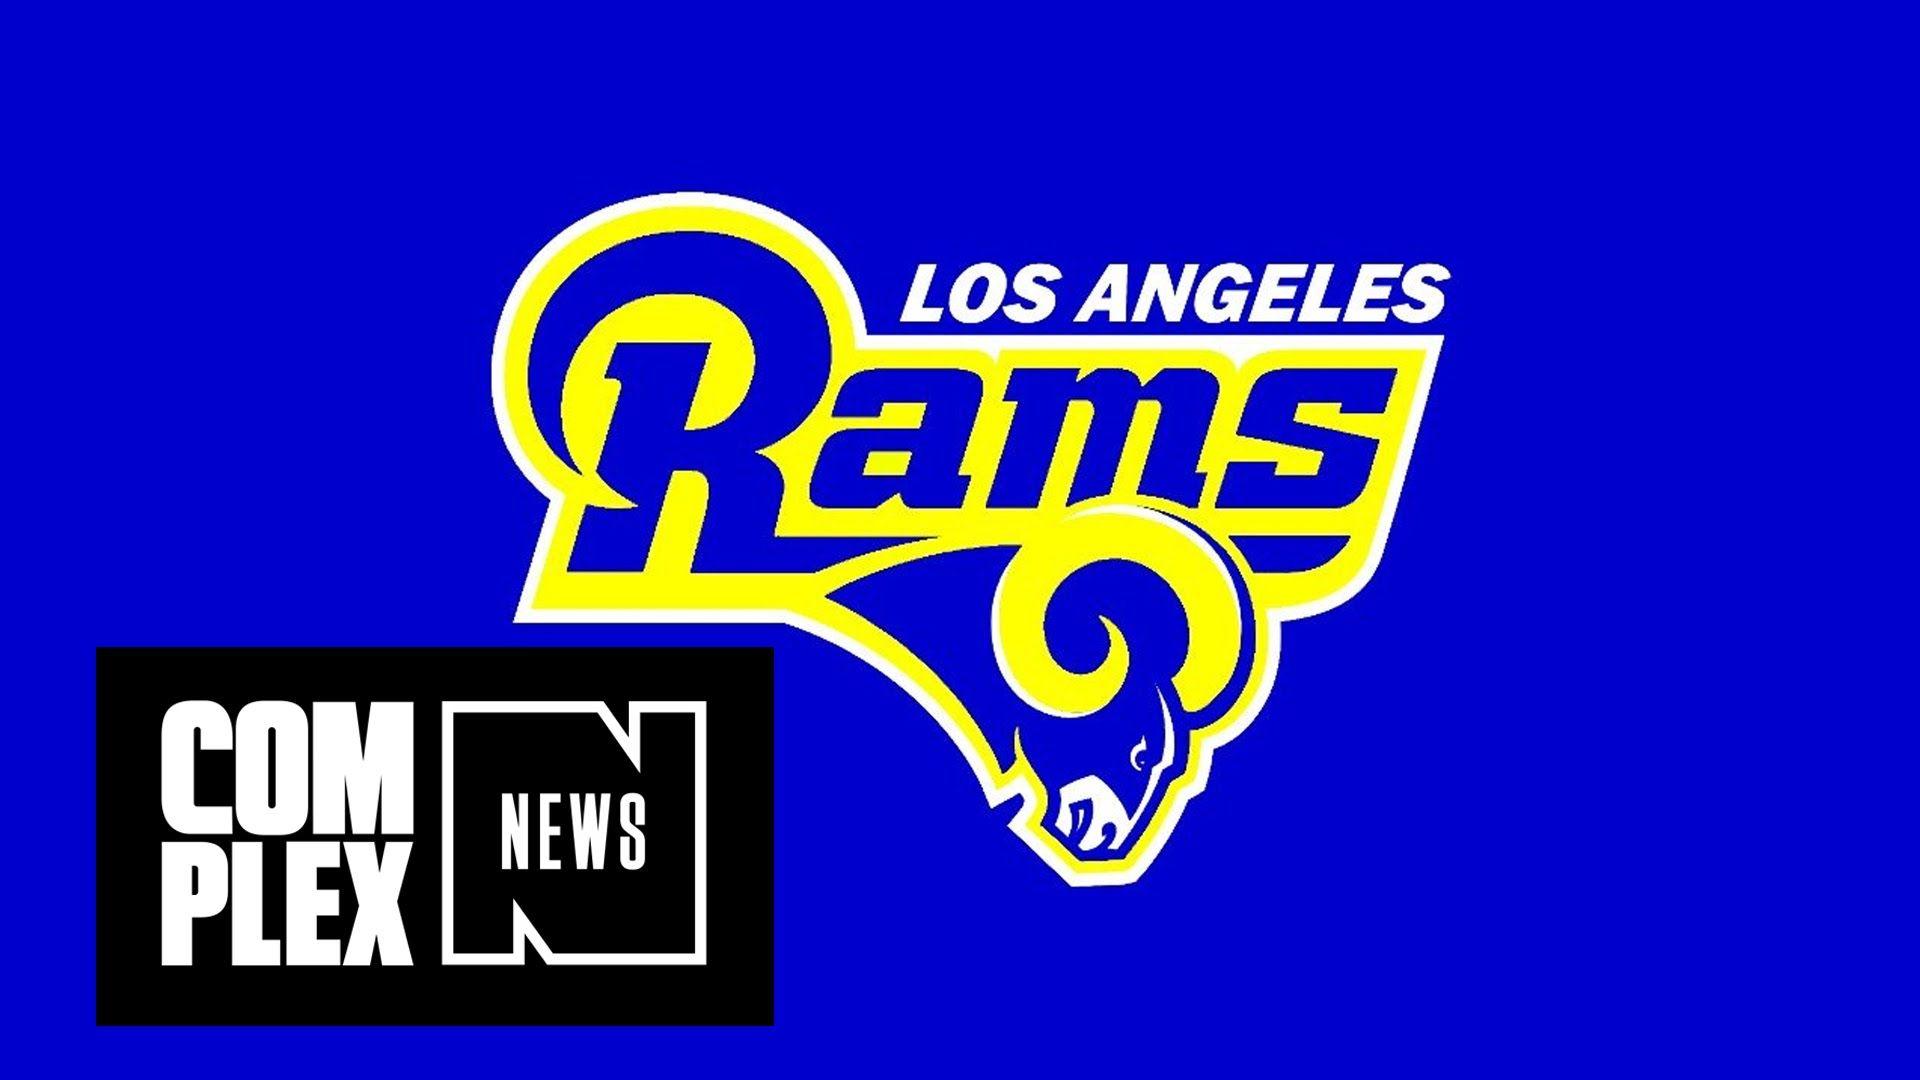 Pour One Out for My St. Louis Rams: Team to Relocate to Los